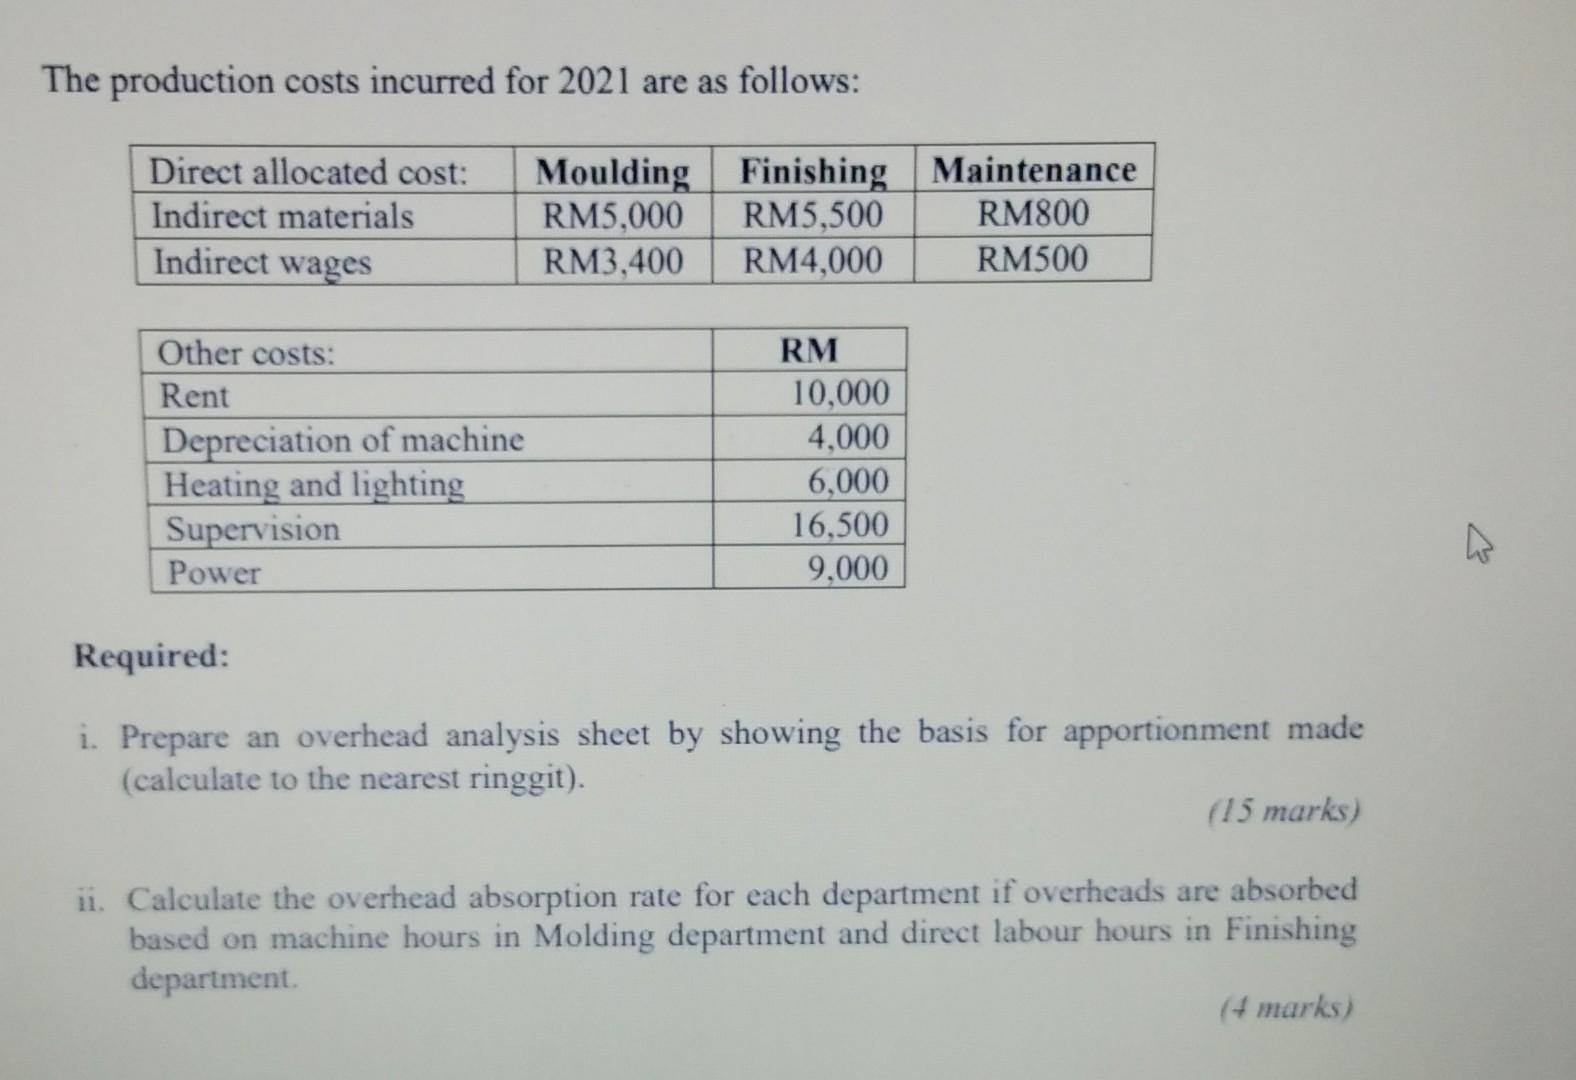 The production costs incurred for 2021 are as follows:Direct allocated cost:Indirect materialsMoulding Finishing Maintenan